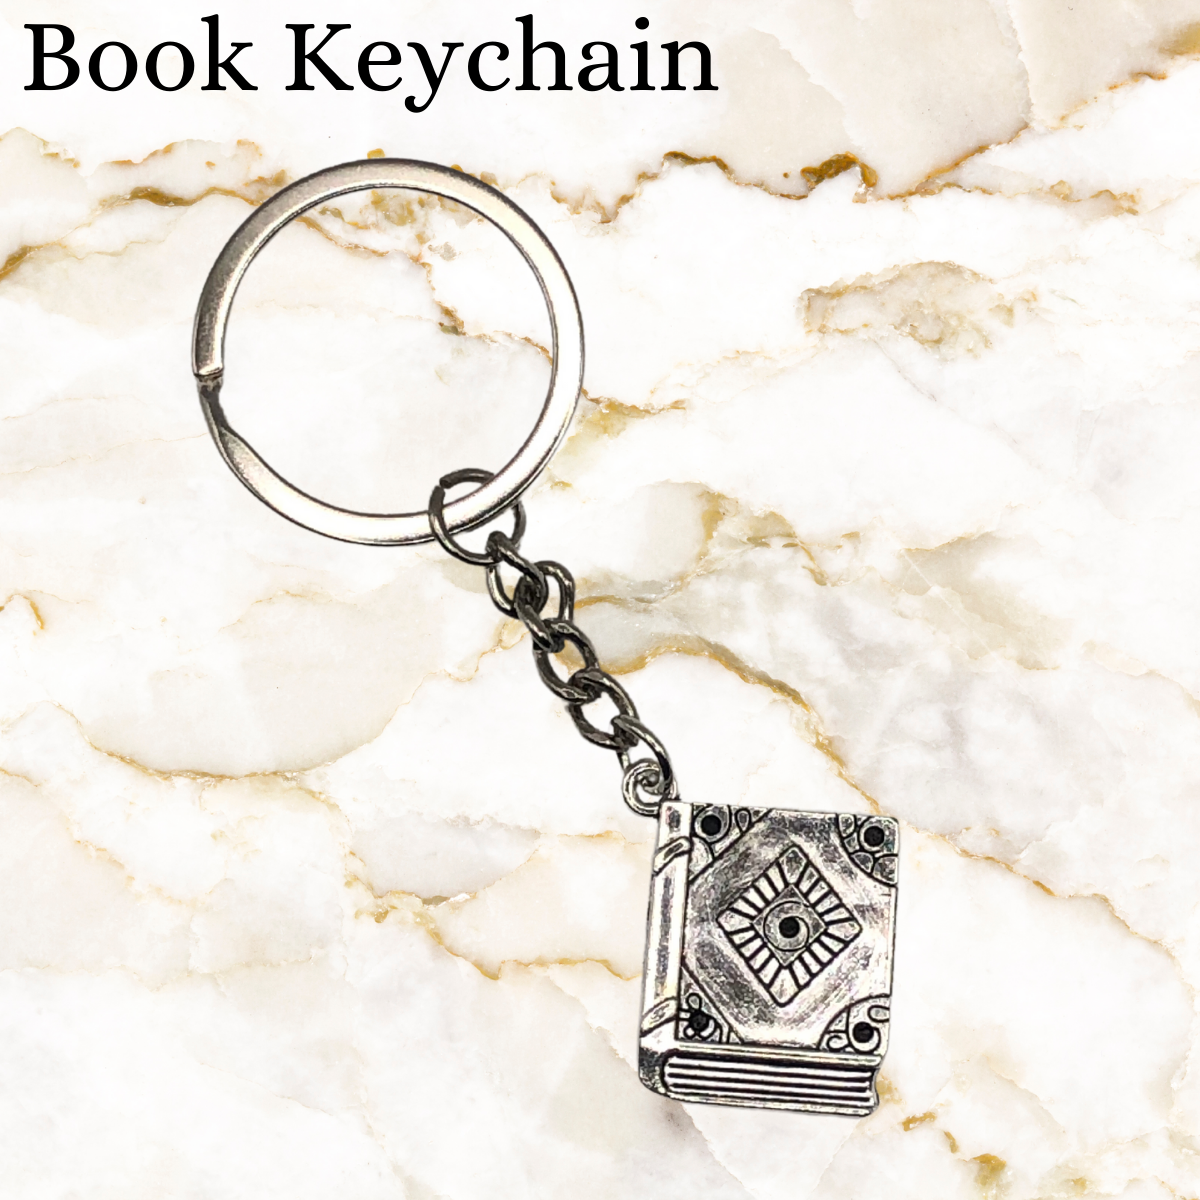 Chrome Keychain with a book on it